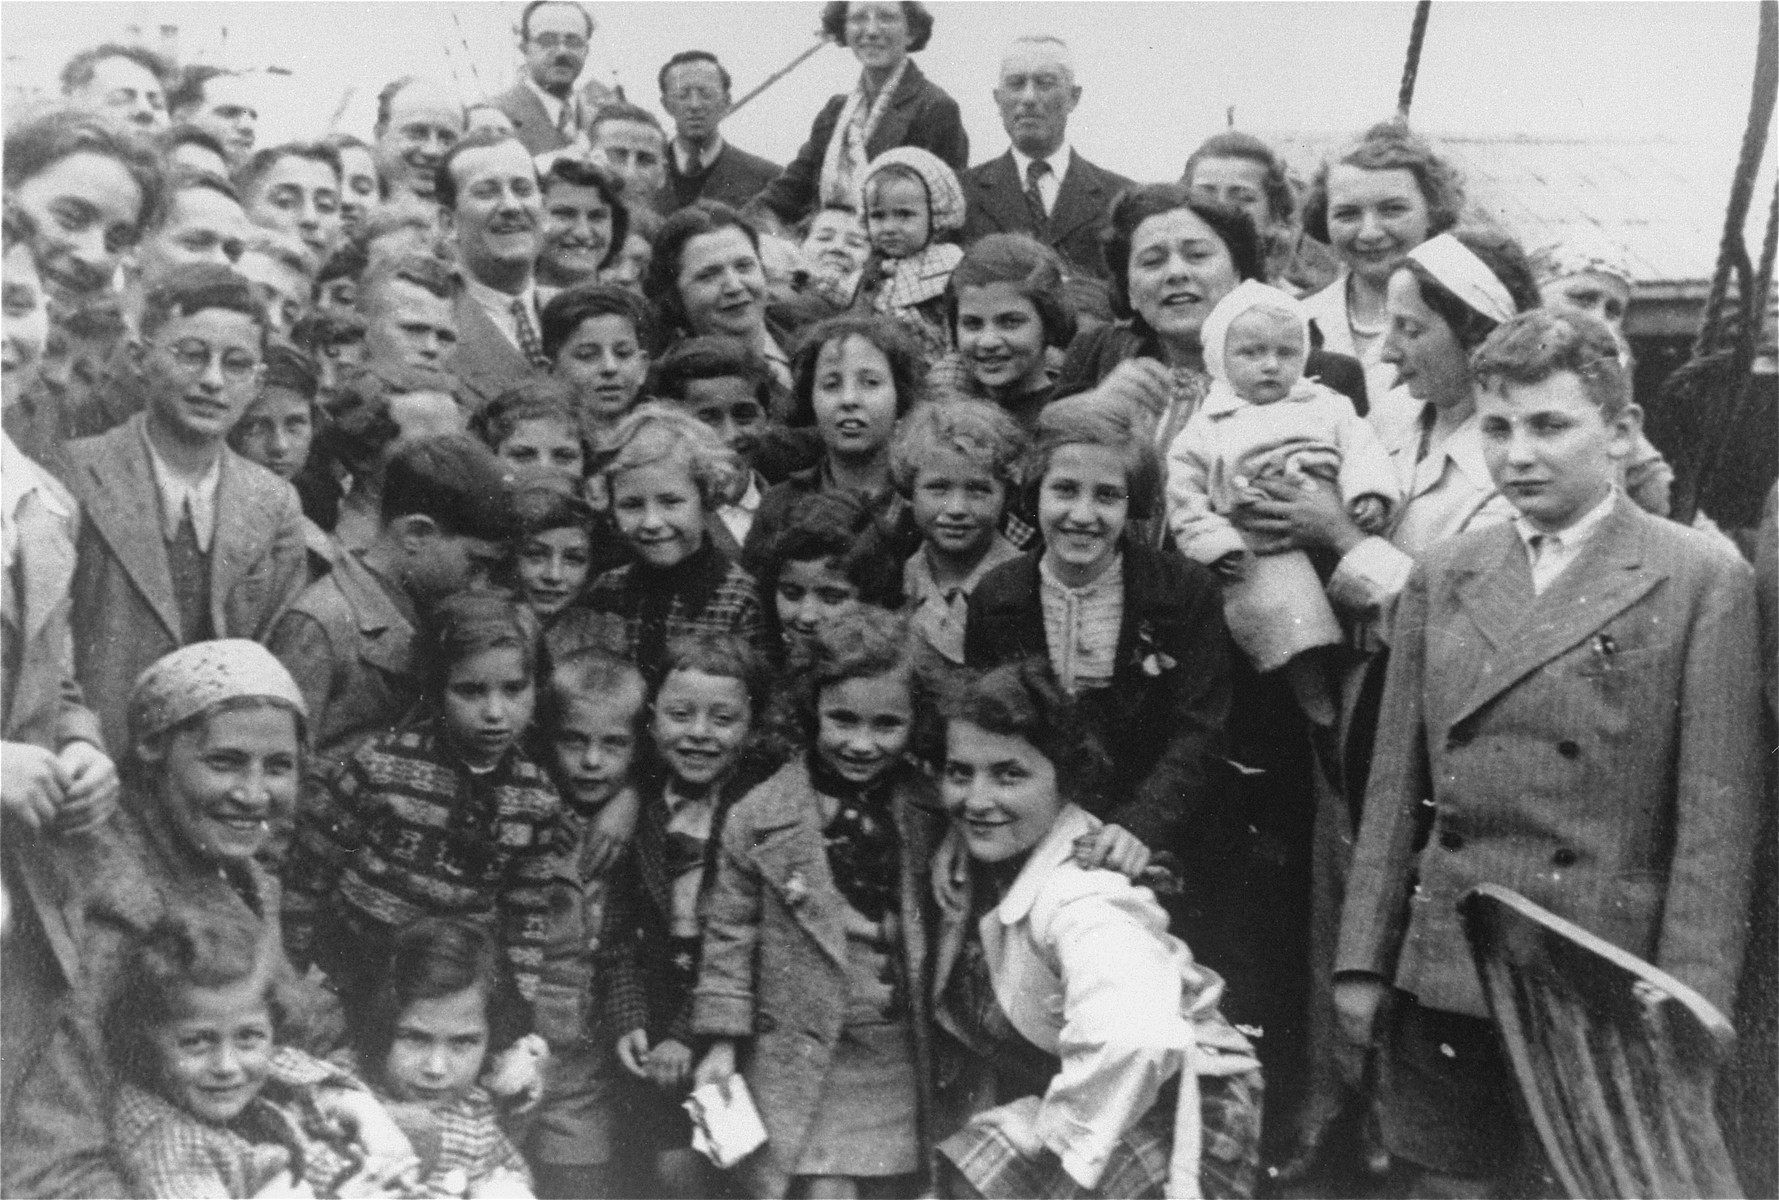 Passengers aboard the MS St. Louis.

Liane Reif, is standing at center, foreground.  Her brother Fred is standing first from the right.  Among the other passengers are Liesl Loeb, Herbert Karliner, Troper, Hans Fischer, Lisl Mandel, Henry Gallan, Judl Gunther and Oskar Blechner.